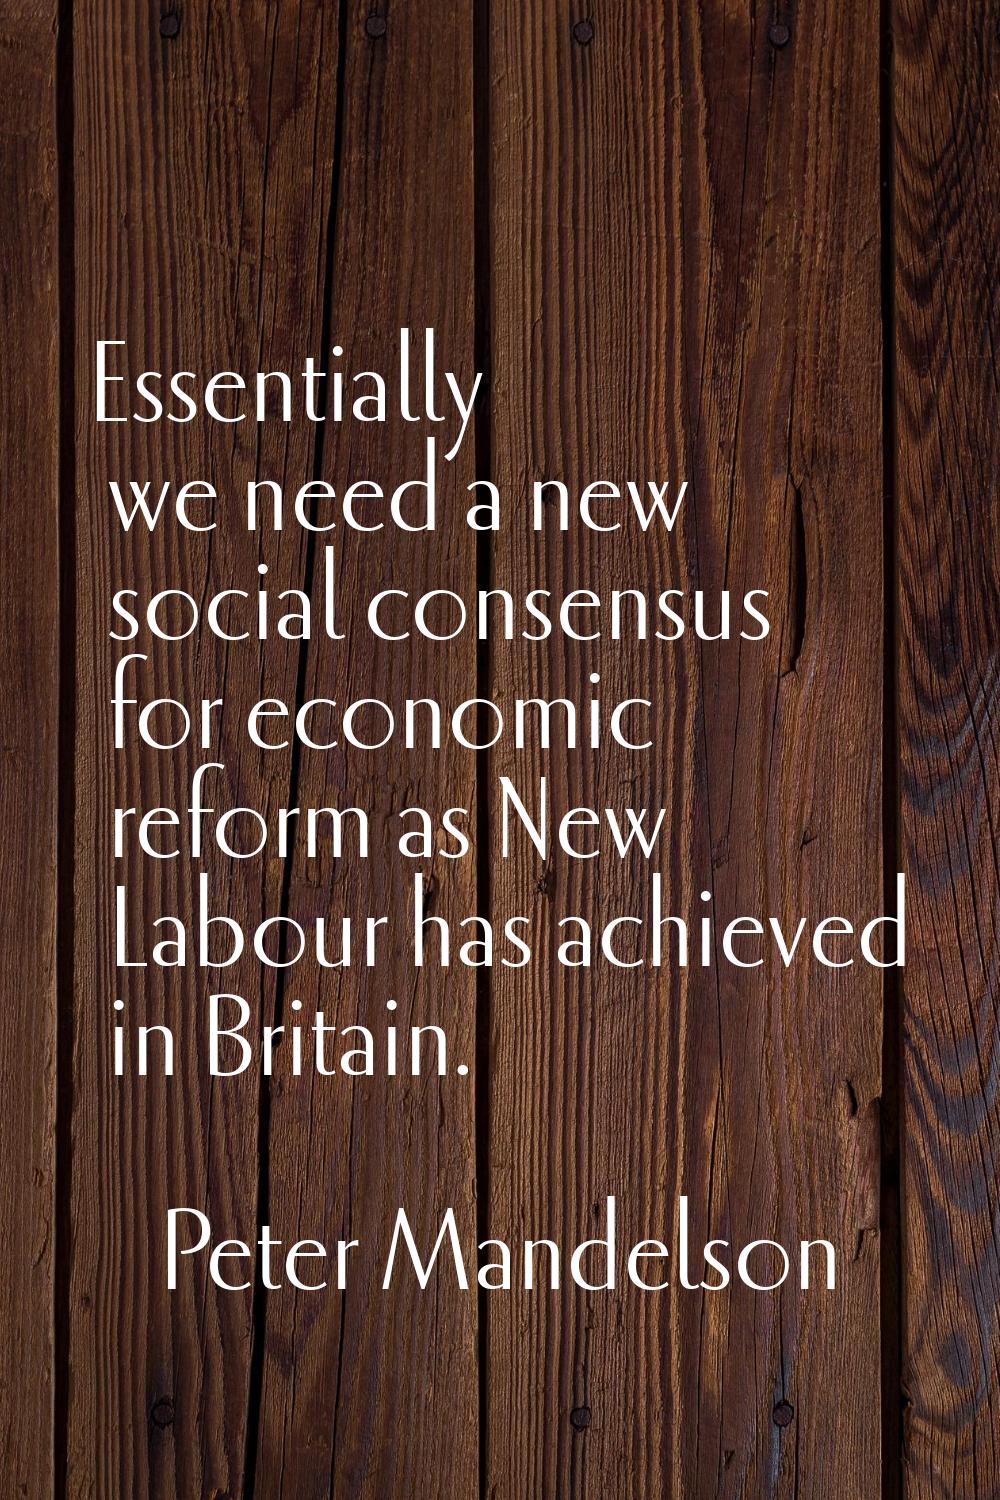 Essentially we need a new social consensus for economic reform as New Labour has achieved in Britai